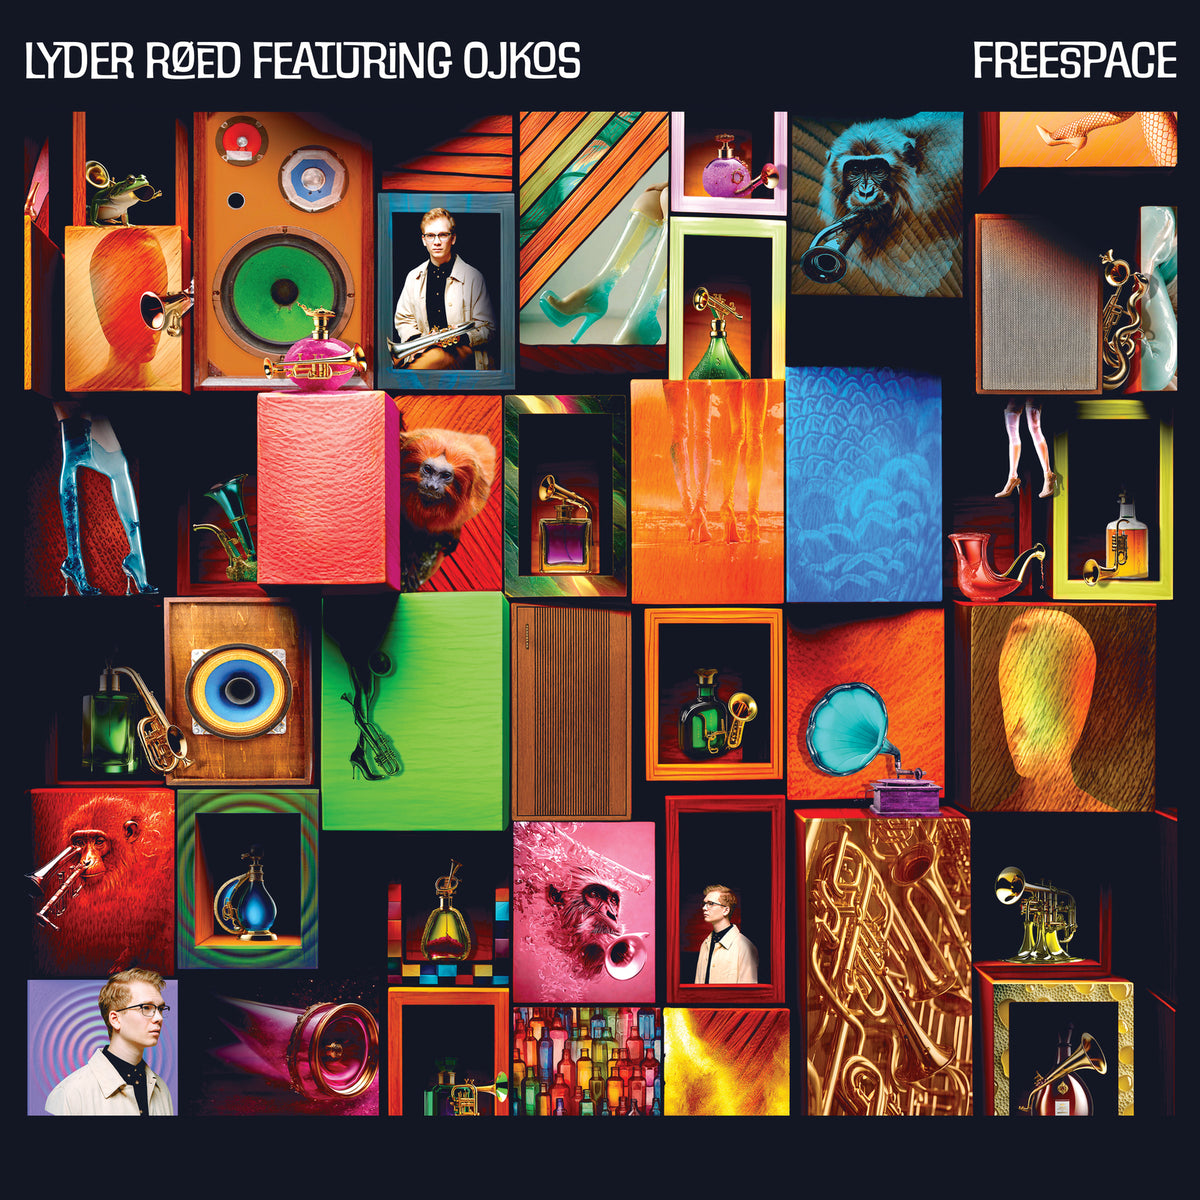 Lyder Roed & OJKOS - Freespace - 3779642